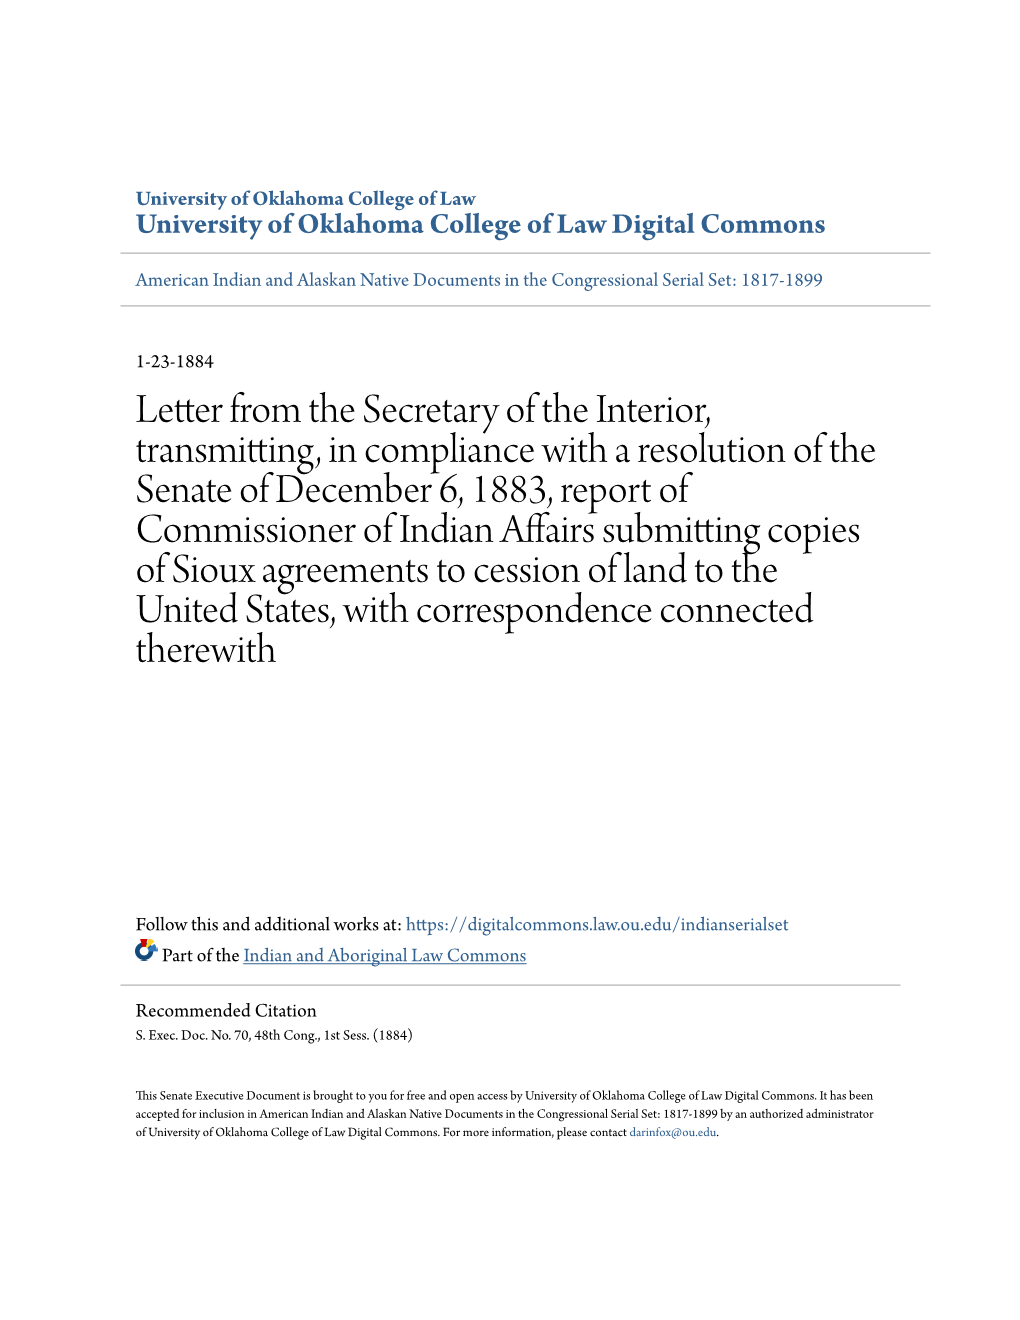 Letter from the Secretary of the Interior, Transmitting, in Compliance with A